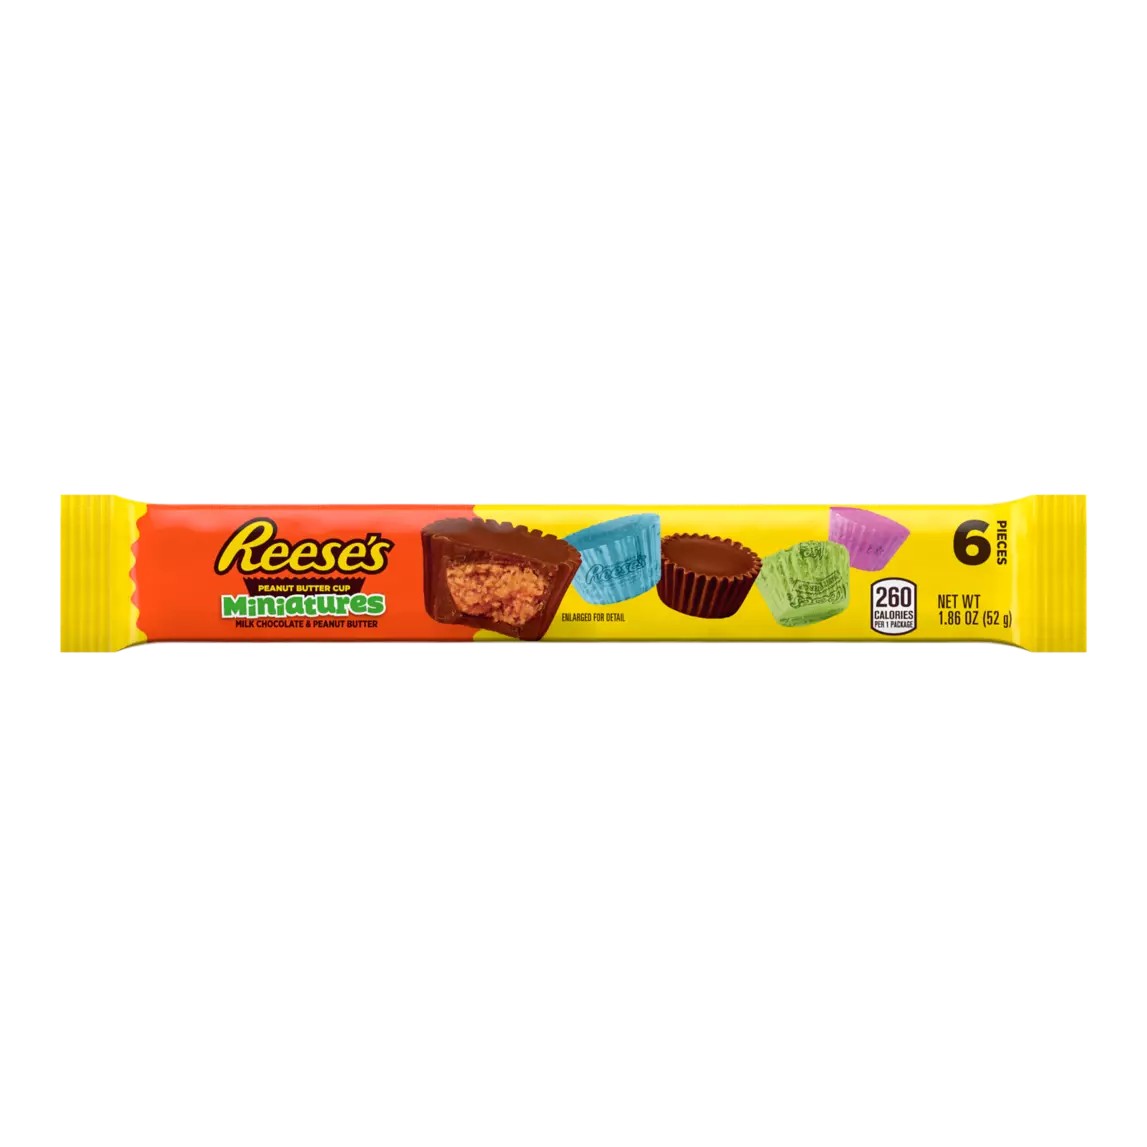 Reese's Easter Miniature Peanut Butter Cups 1.86 oz. Sleeve